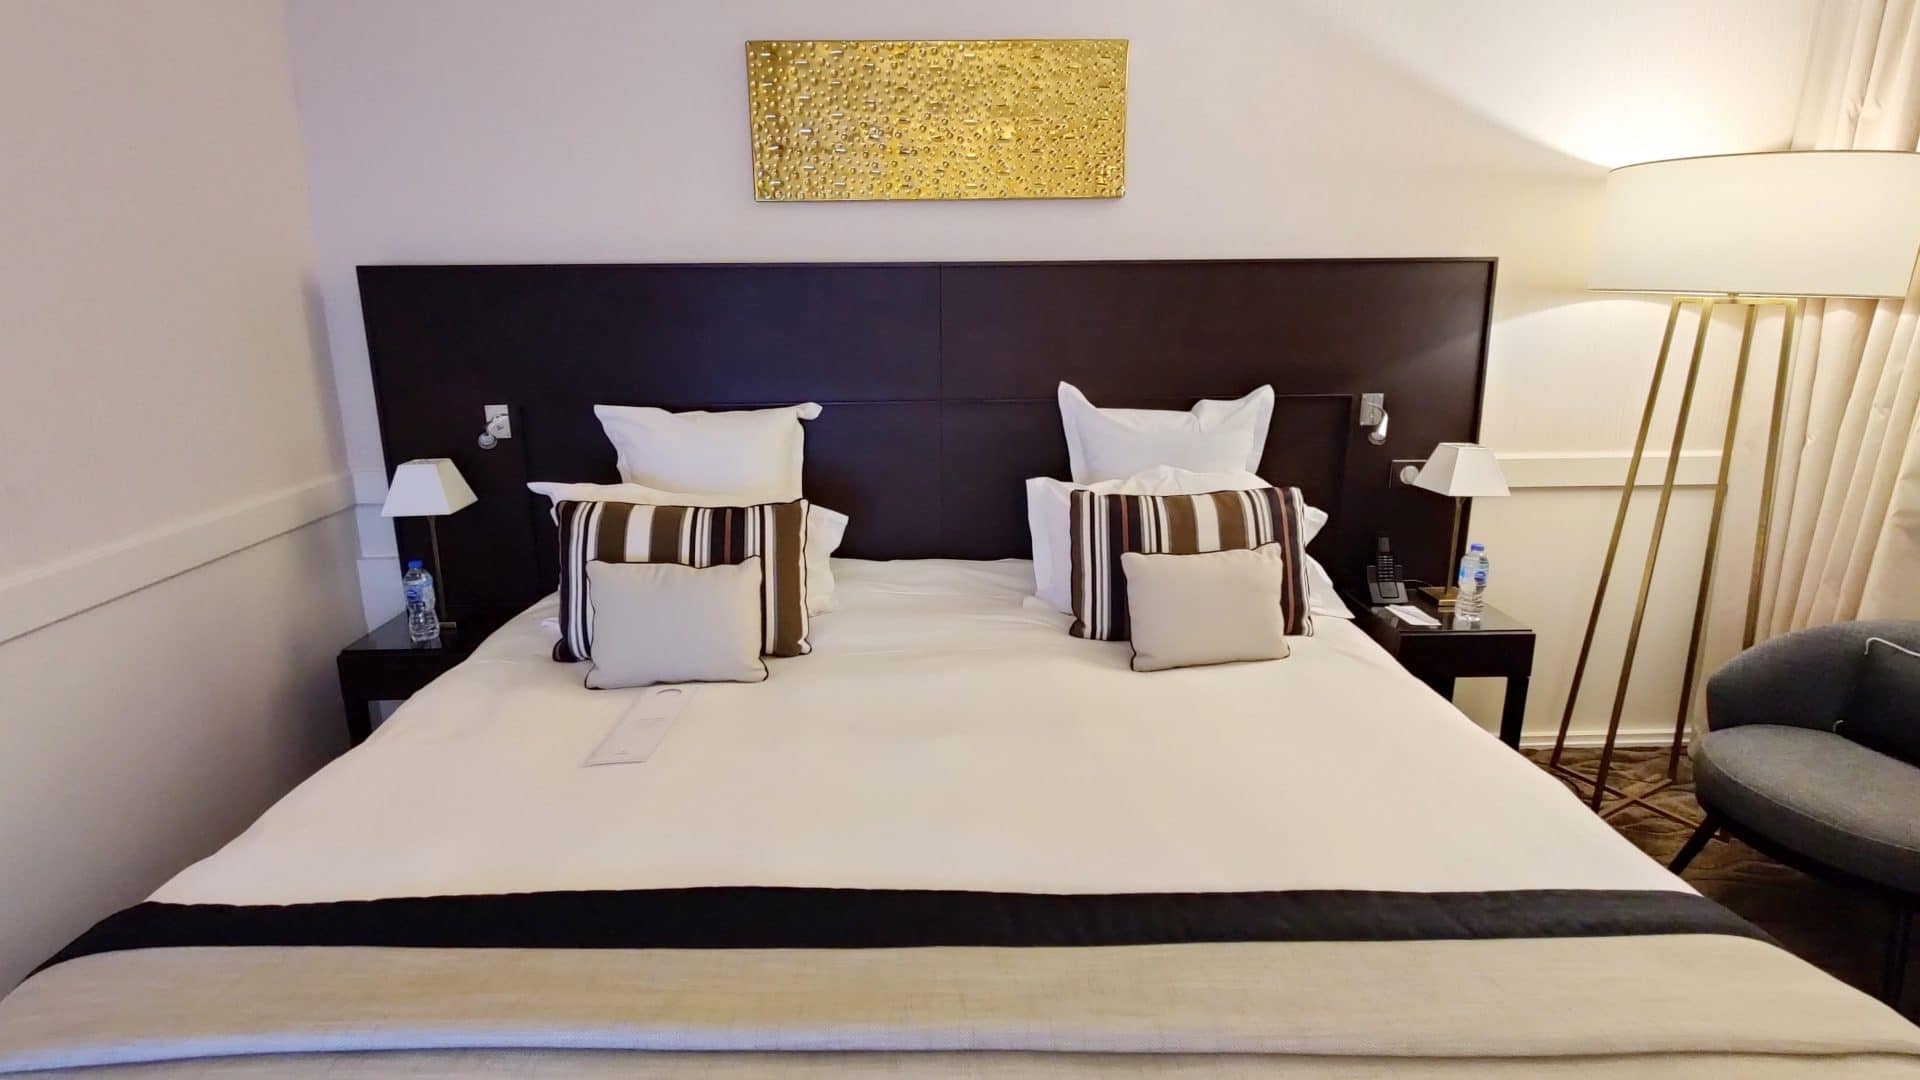 Hotel Barriere Le Gray D'Albion Cannes Zimmer Bett 2